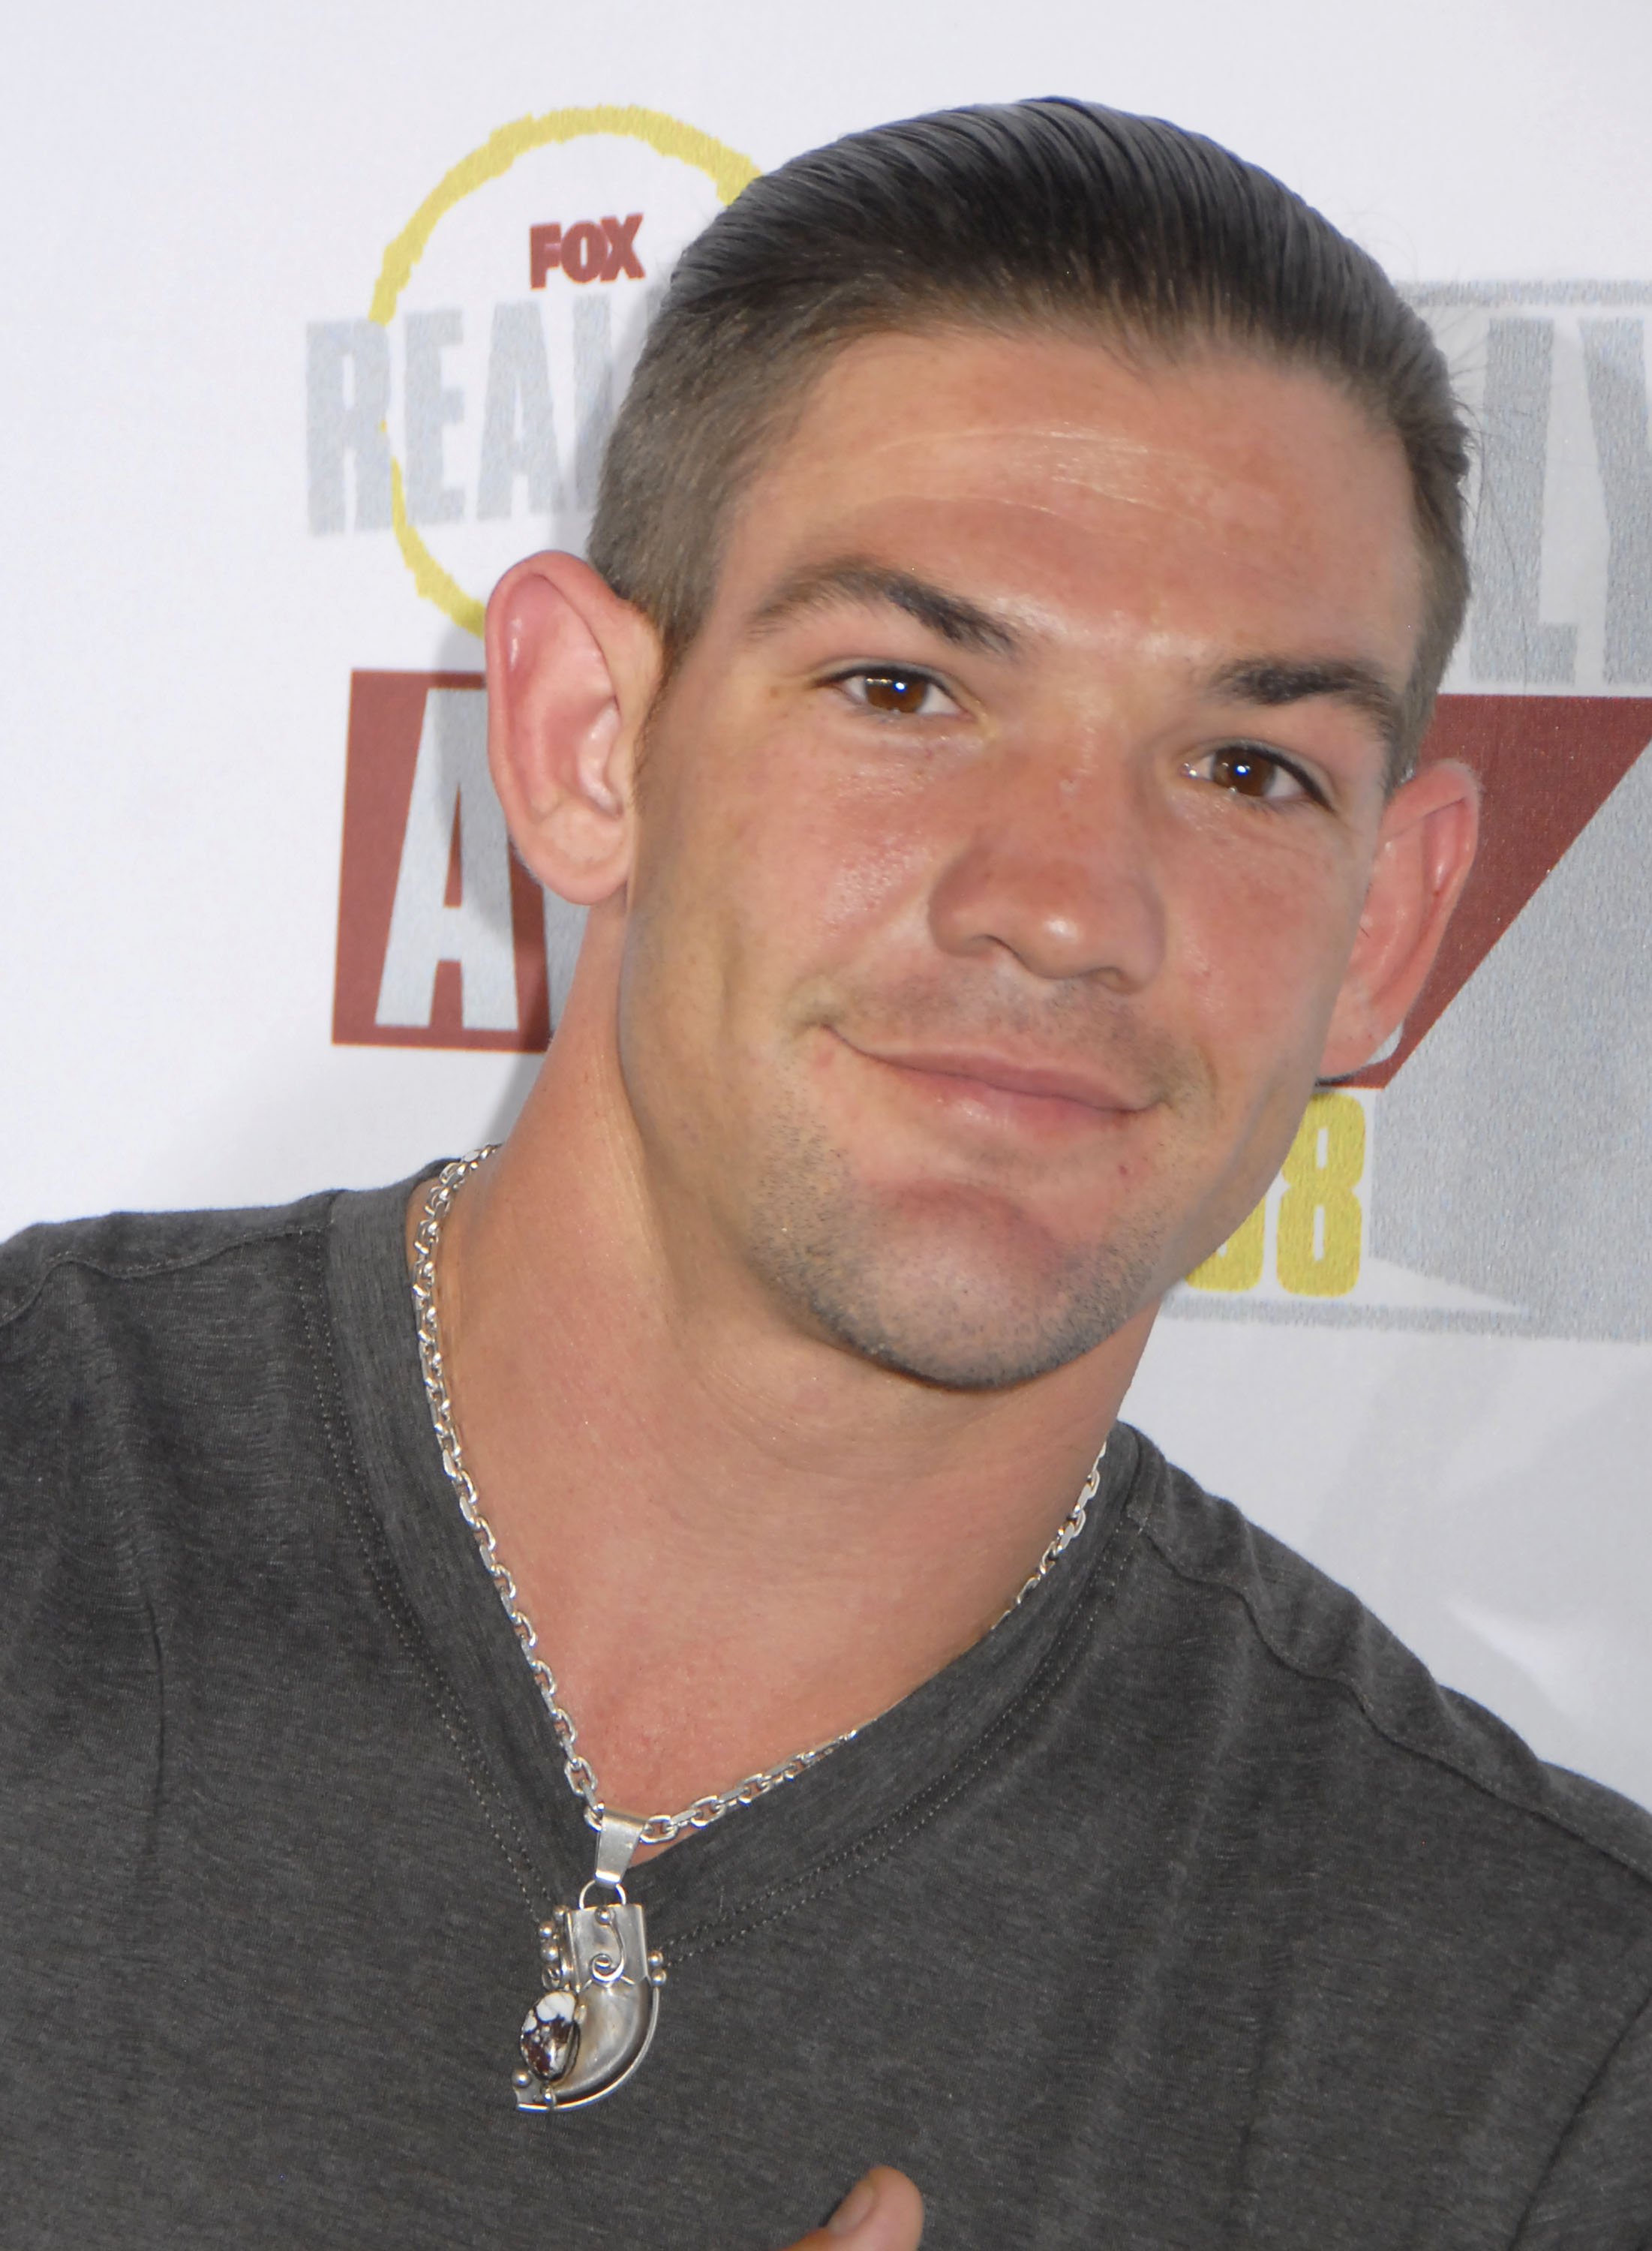 Leland Chapman at the Fox Reality Channel's Really Awards on September 24, 2008, in Hollywood, California. | Source: Getty Images